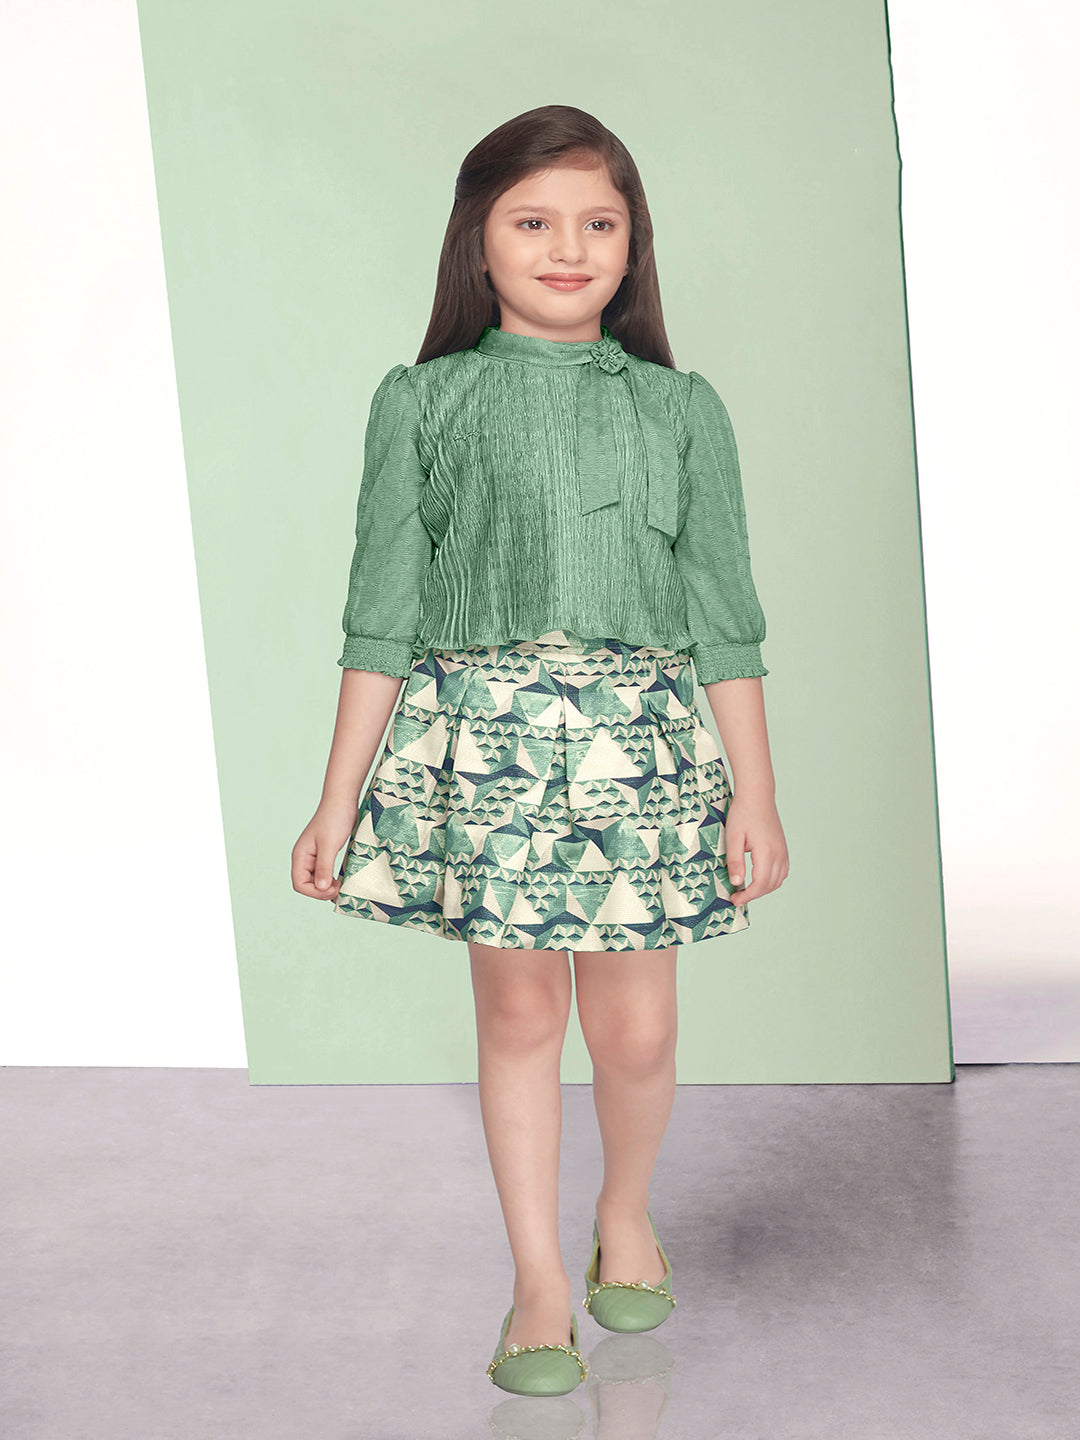 Tiny Baby Green Colored Skirt Top Set - 2122 Green